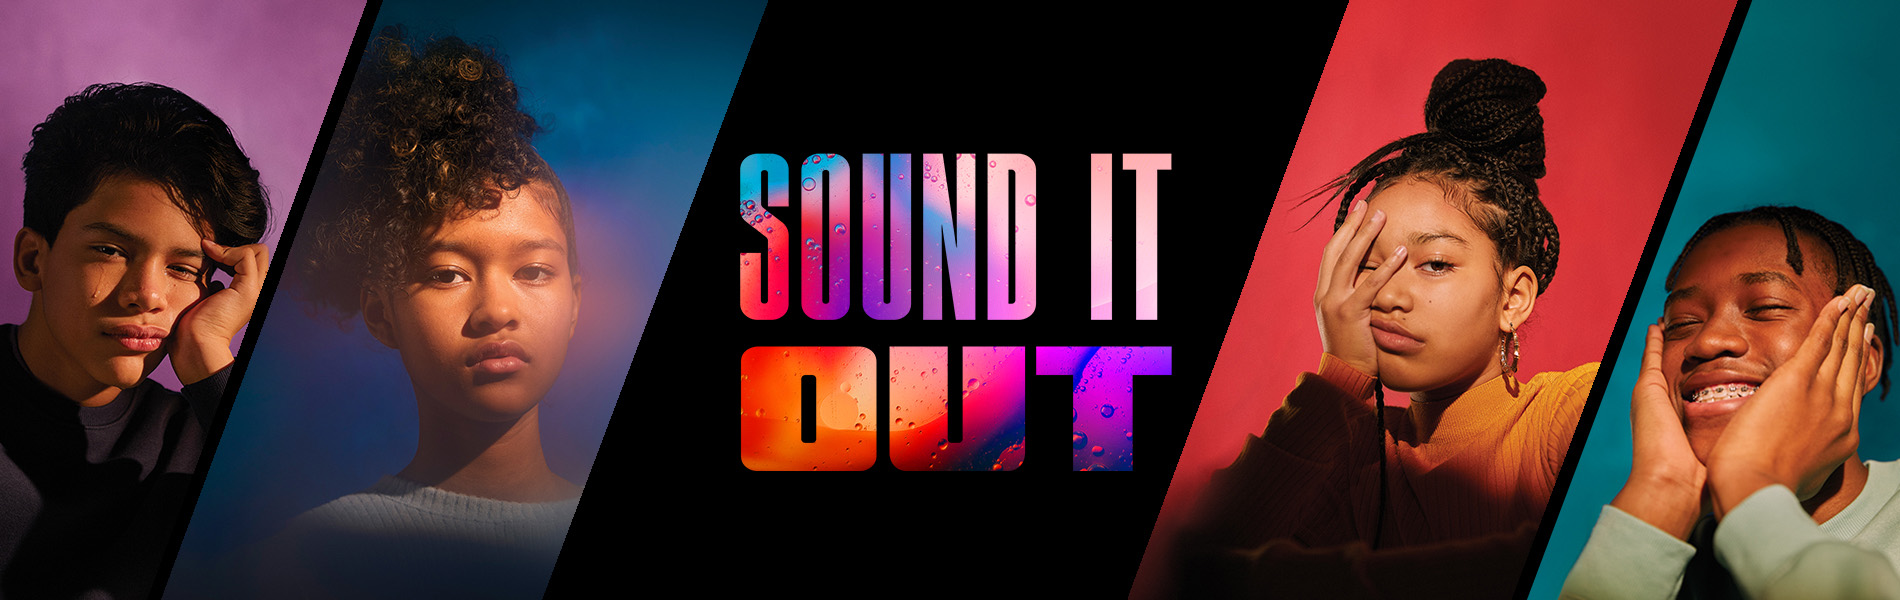 Banner graphic saying "Sound It Out"  with 4 kids